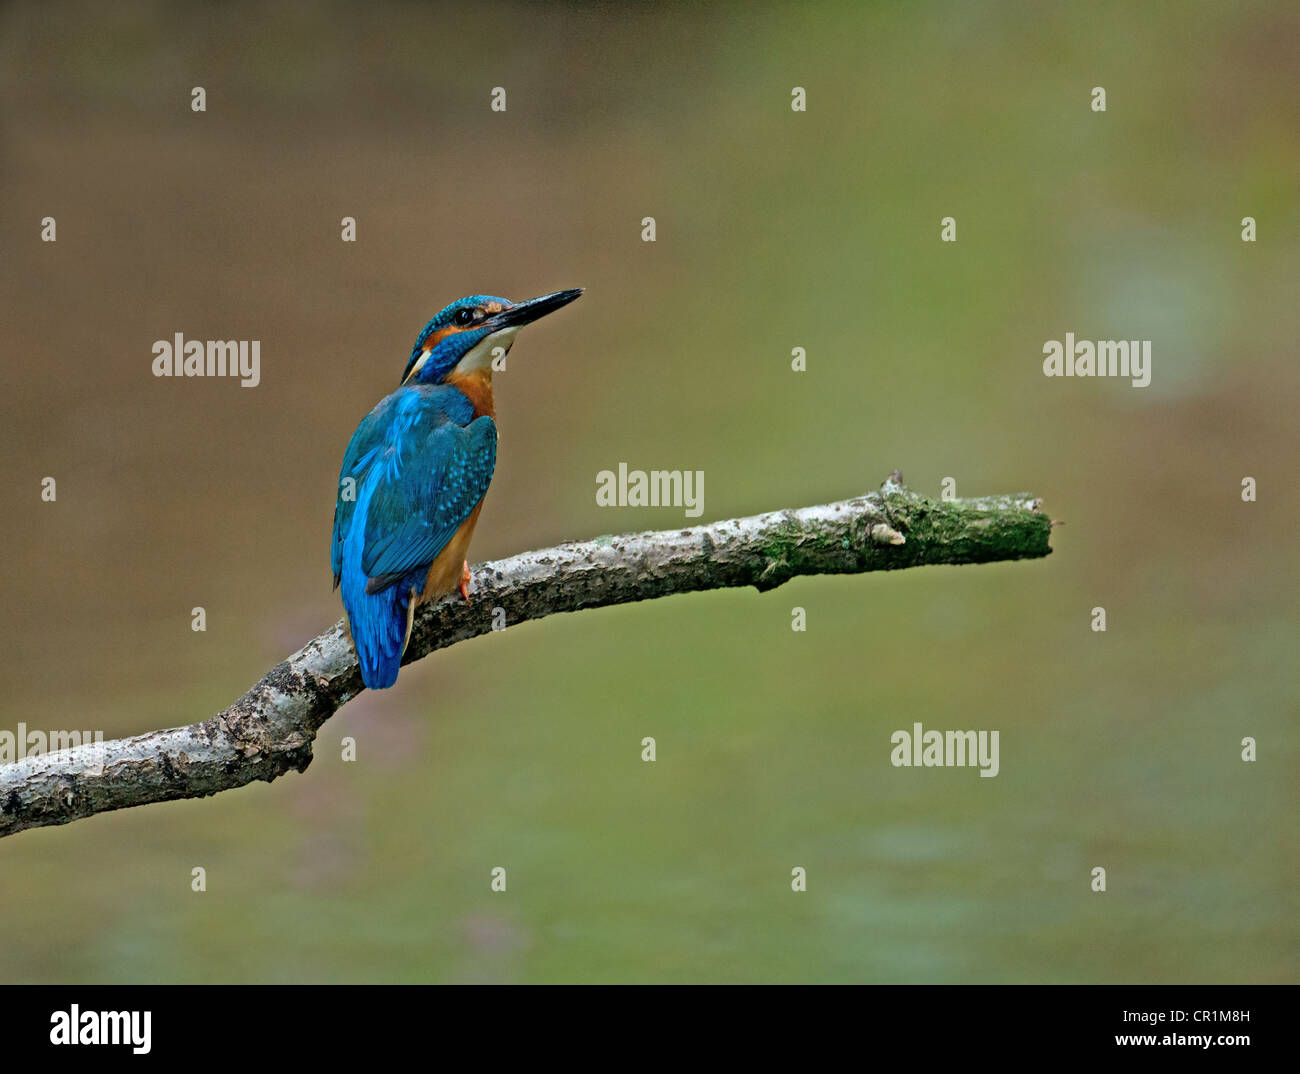 MALE KINGFISHER ALCEDO ATTHIS PERCHED ON BRANCH. UK Stock Photo